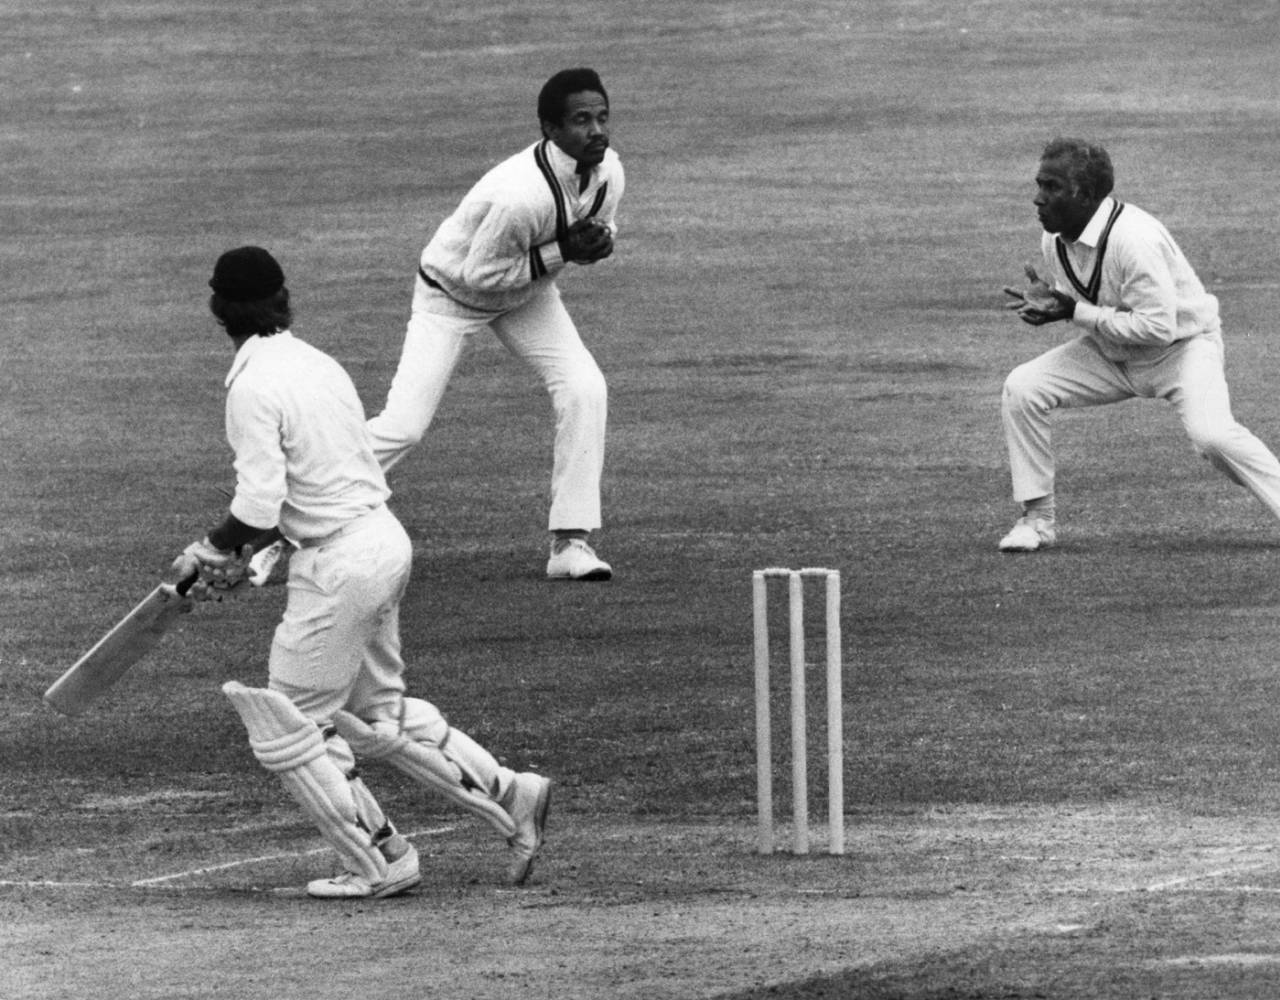 At a time when archival footage wasn't as accessible as it is today, great photographs helped enhance one's knowledge of a particular game&nbsp;&nbsp;&bull;&nbsp;&nbsp;Getty Images